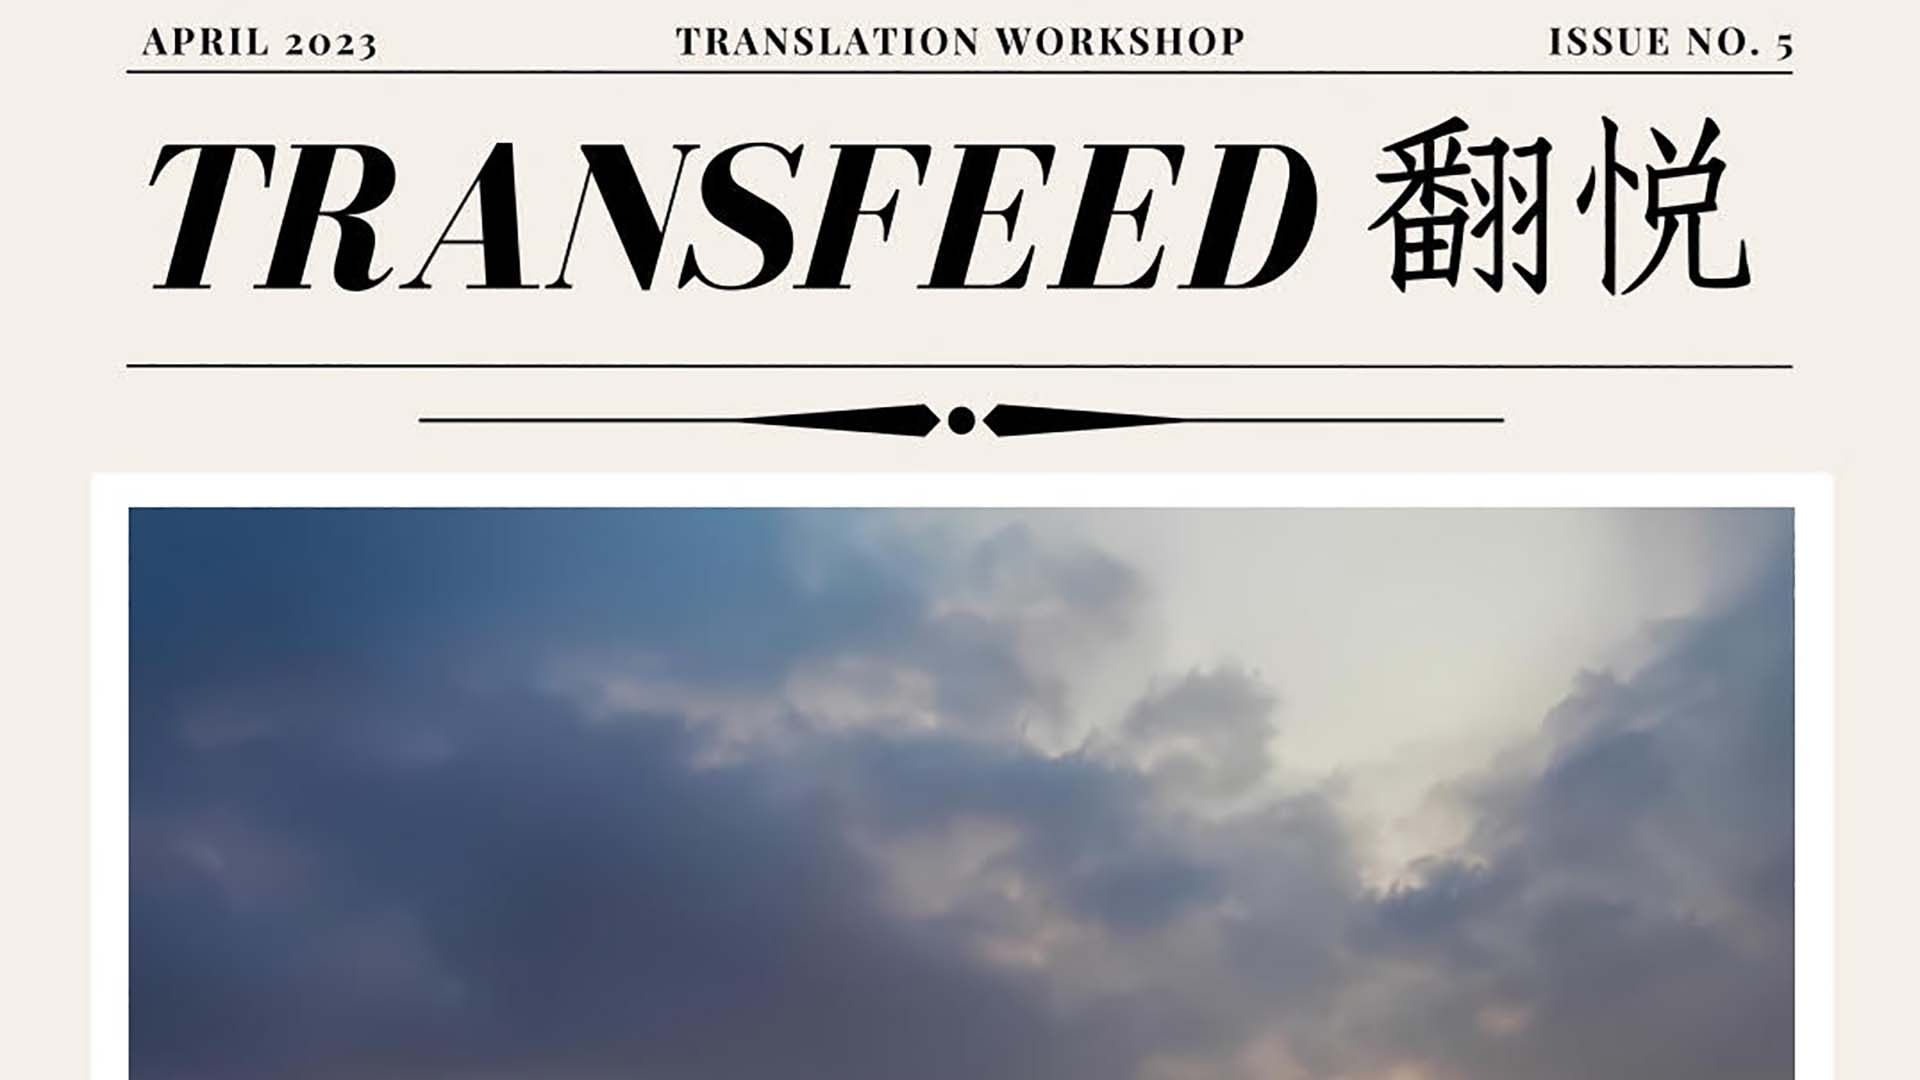 TransFeed (issue 5)